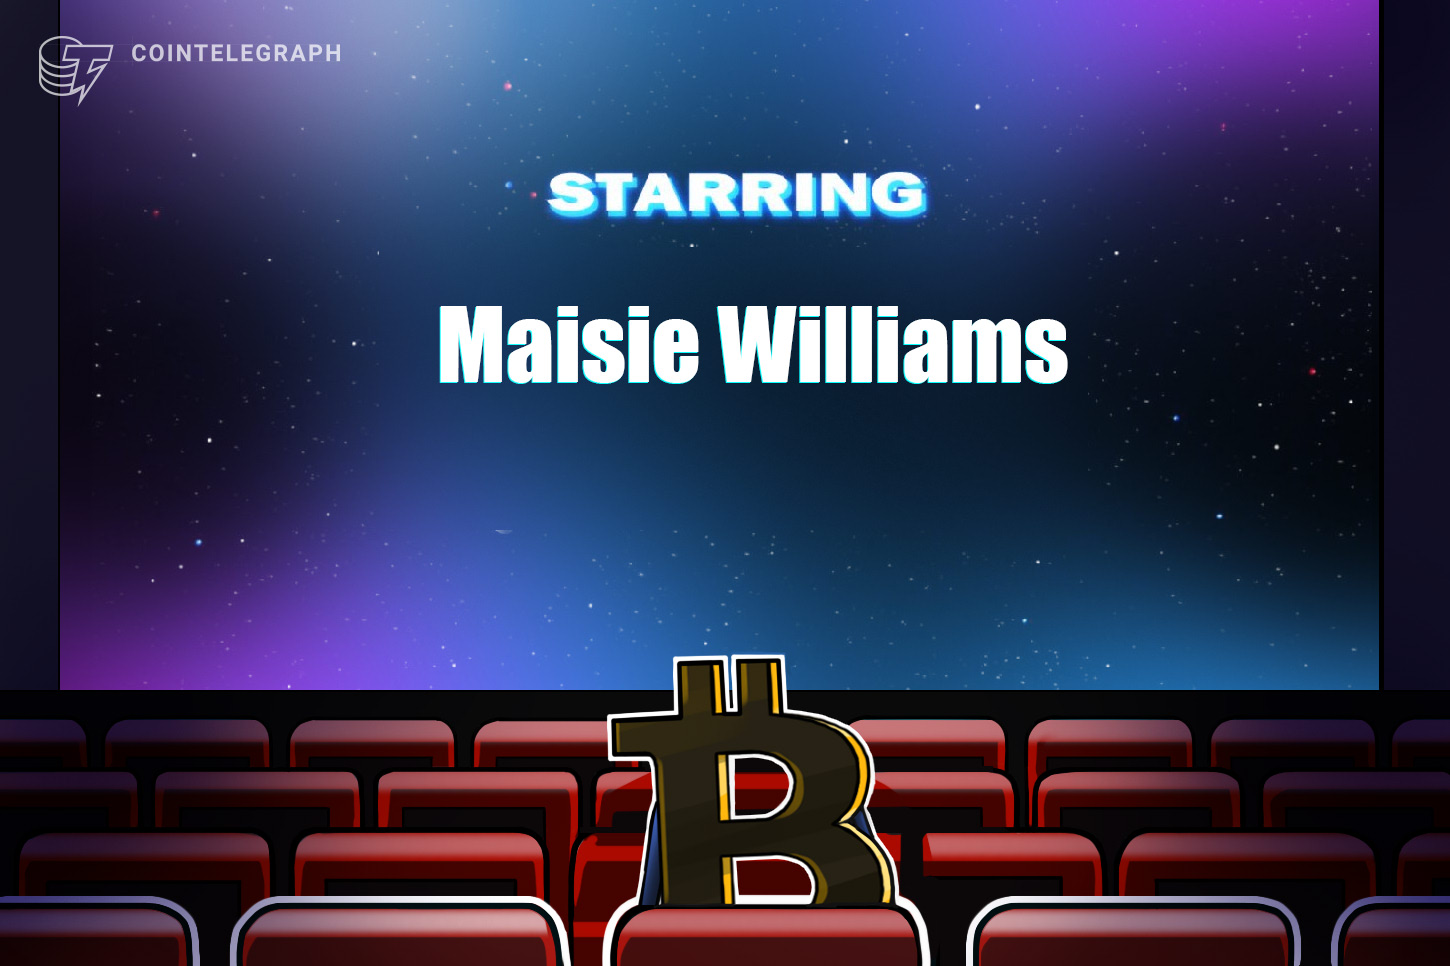 Actress Maisie Williams turning into the most recent Bitcoiner?